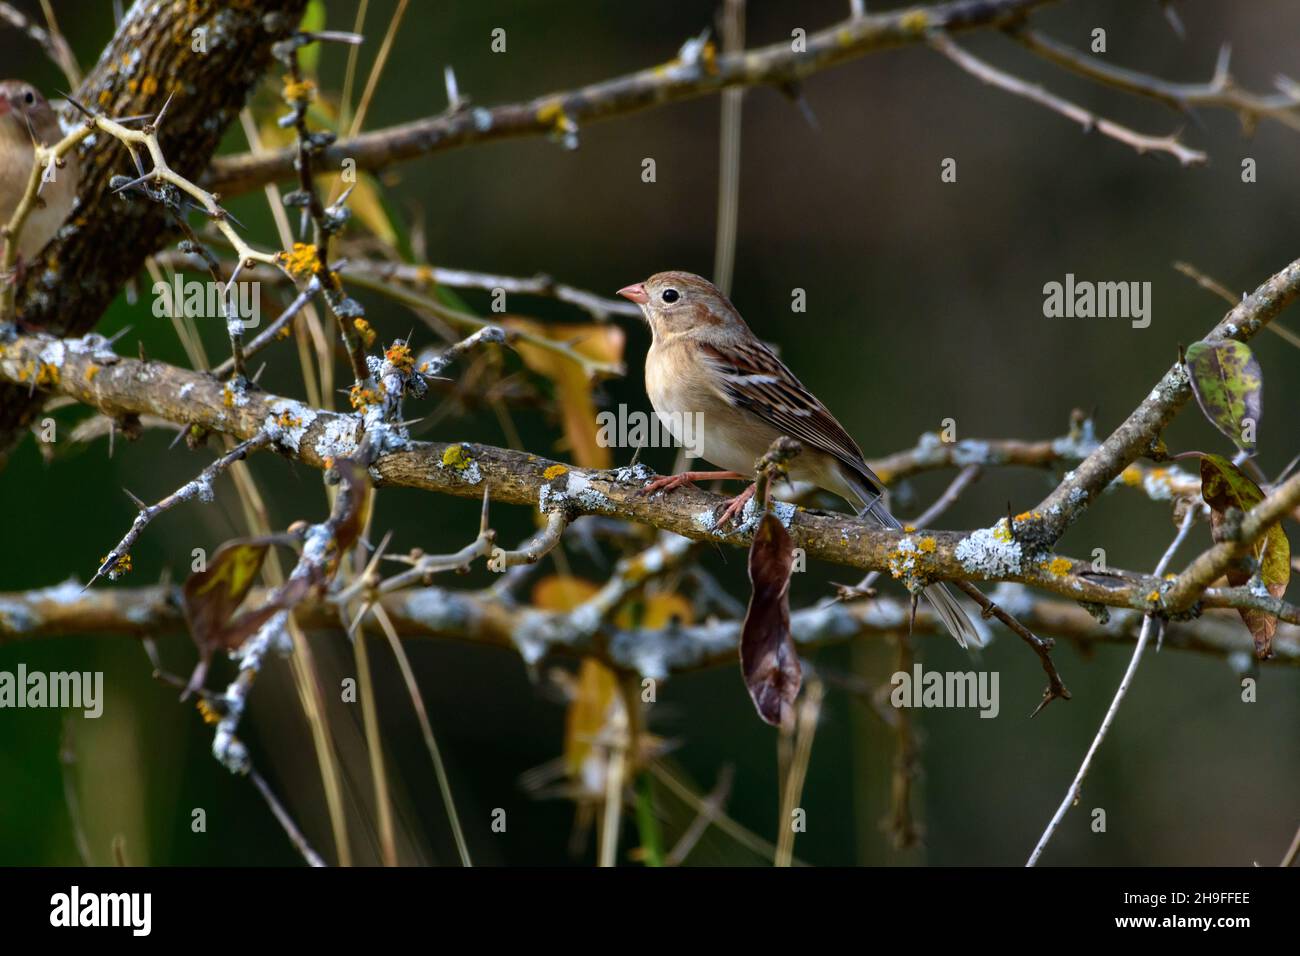 Field Sparrow - Spizella pusilla - Perched in tree with thorny branches Stock Photo